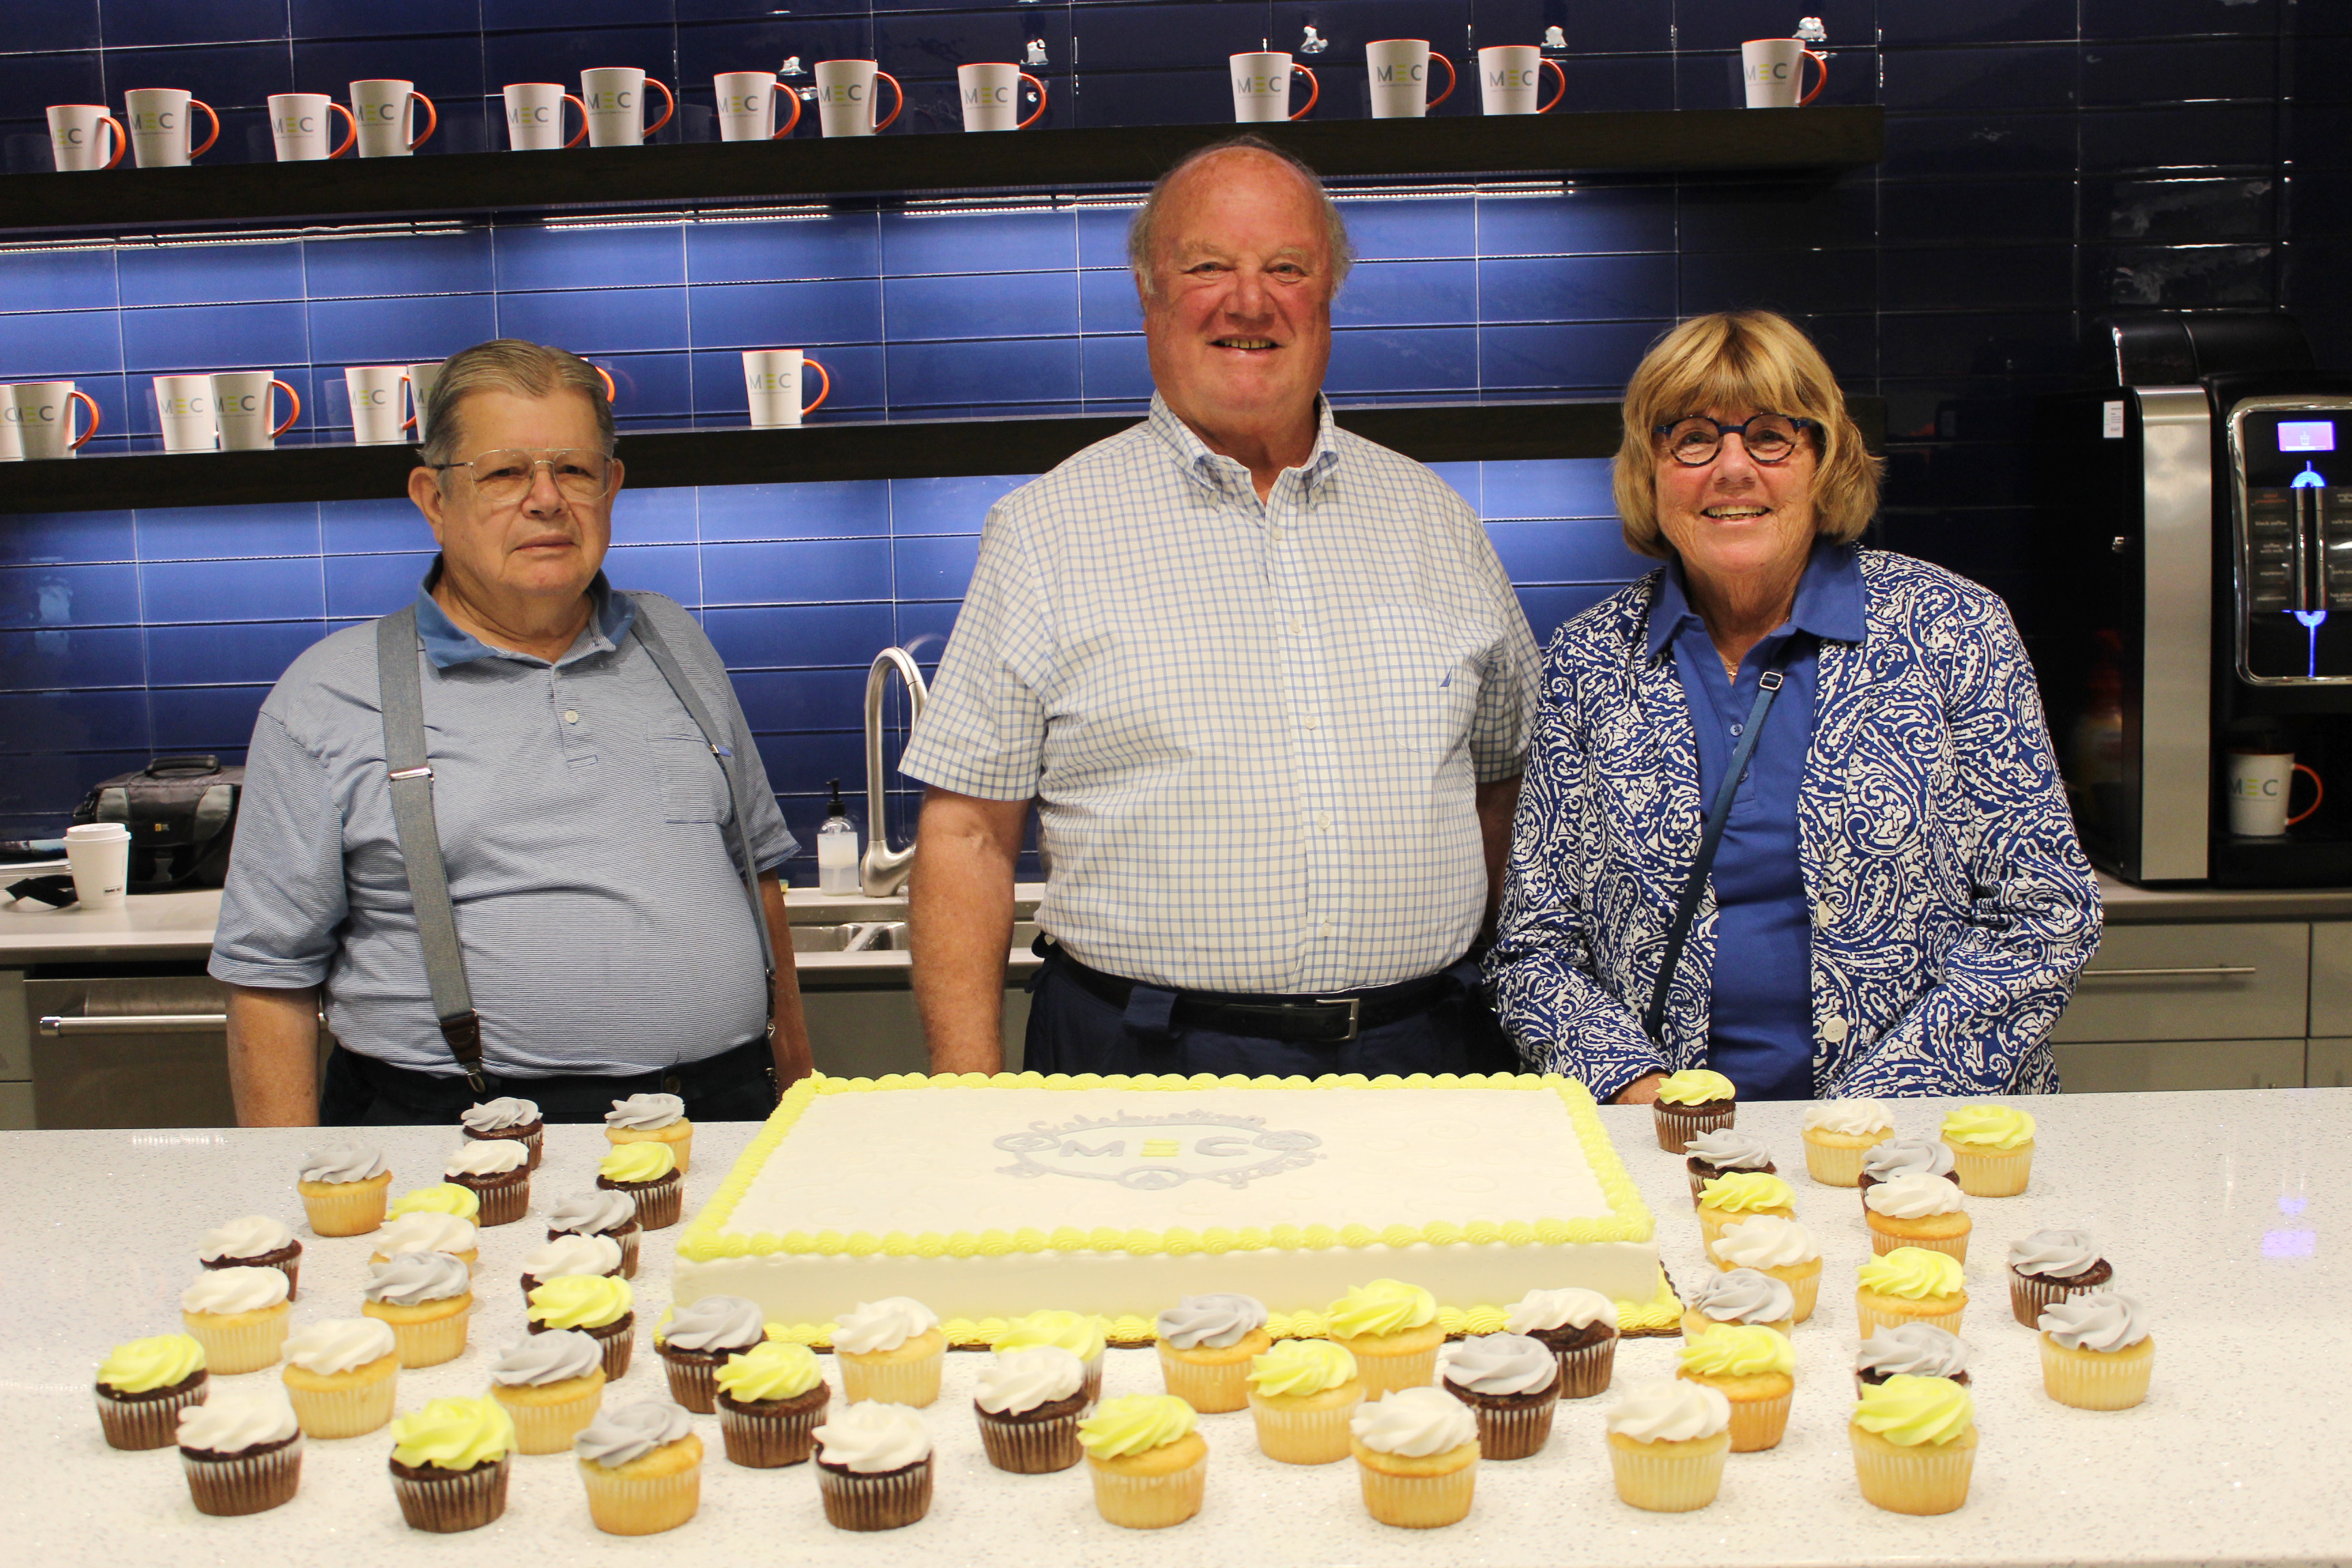 Special guests join us for anniversary celebration and cake.